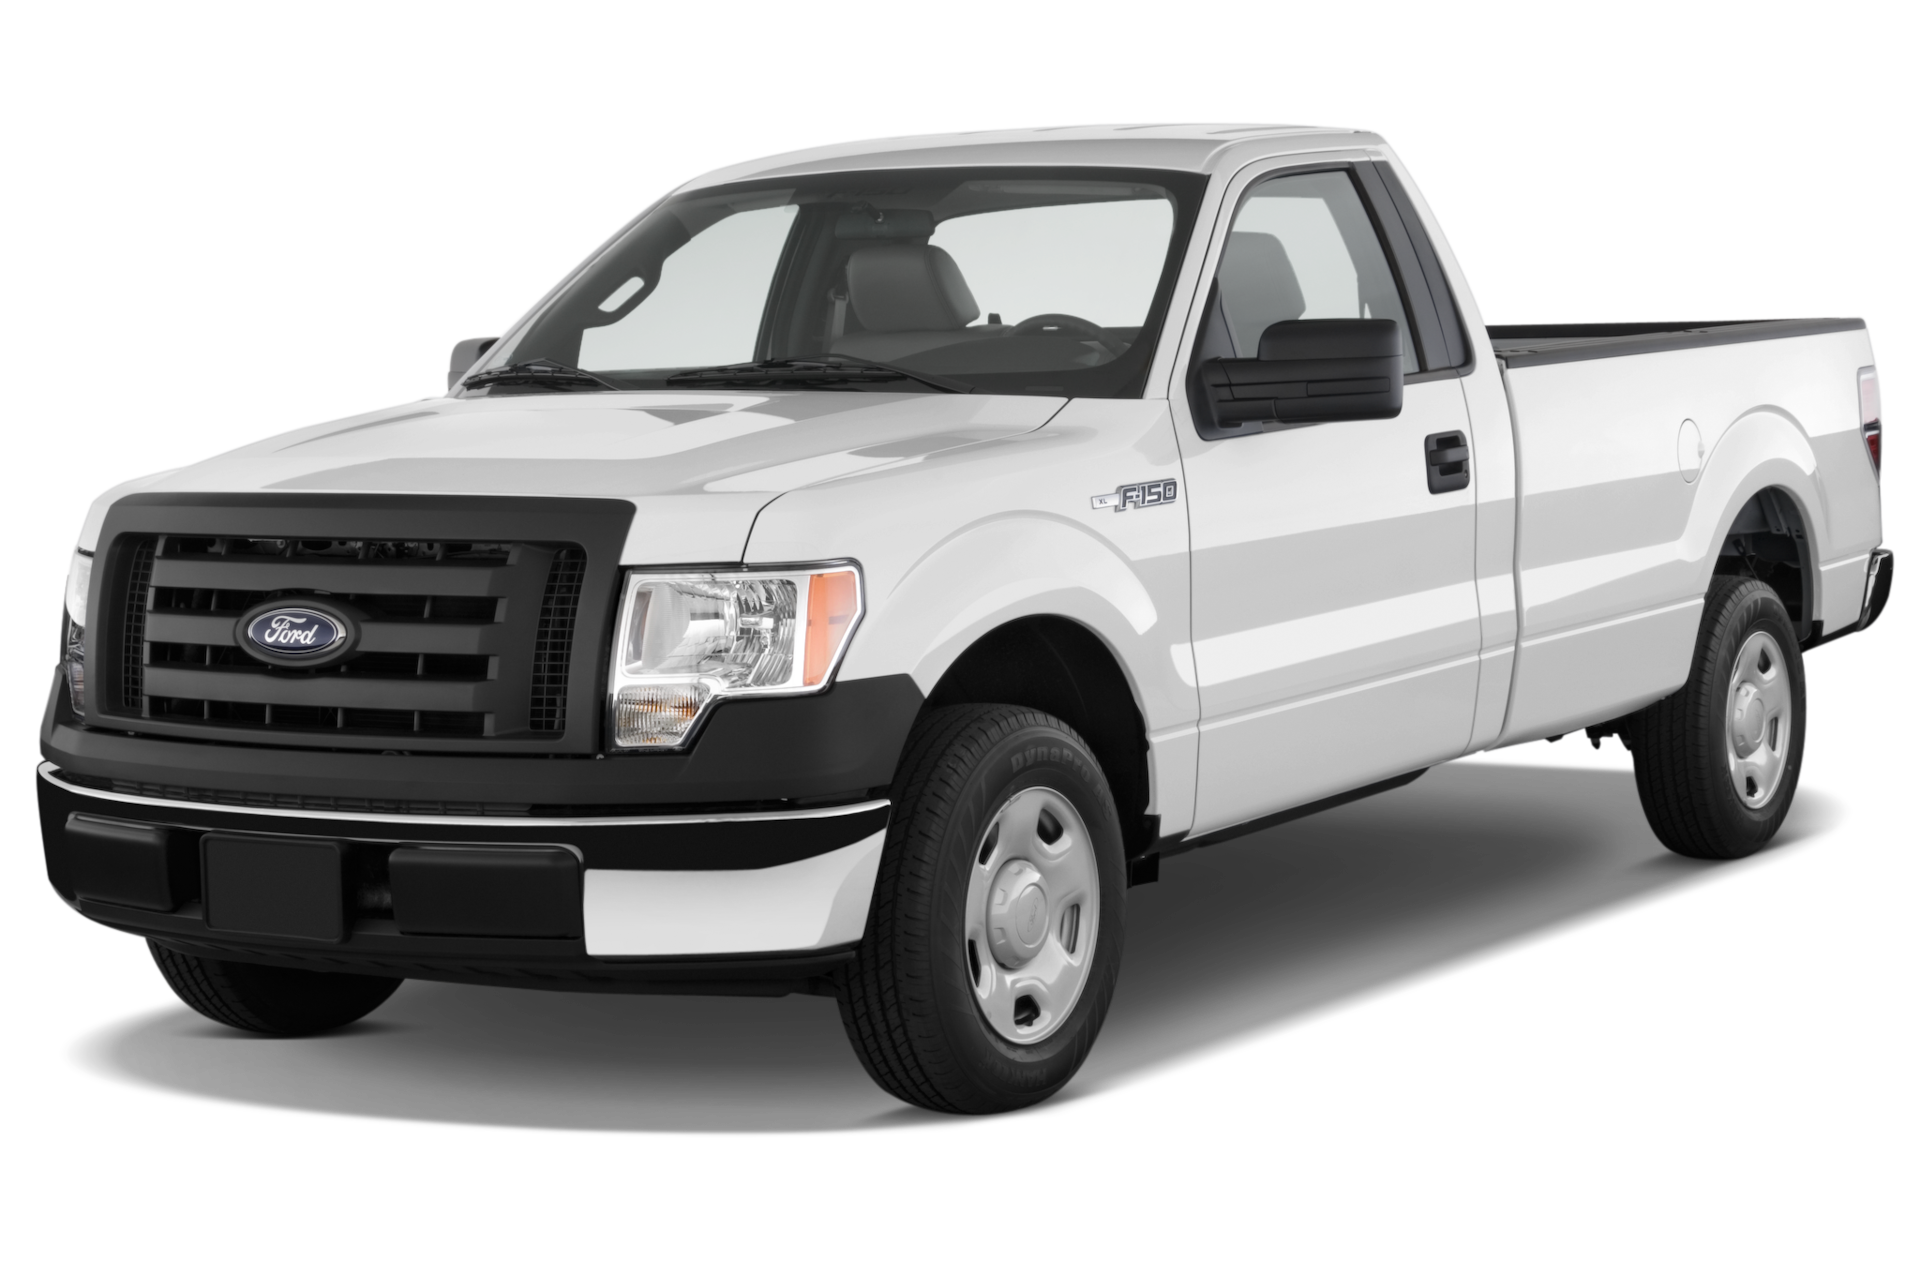 2011 Ford F-150 Prices, Reviews, and Photos - MotorTrend